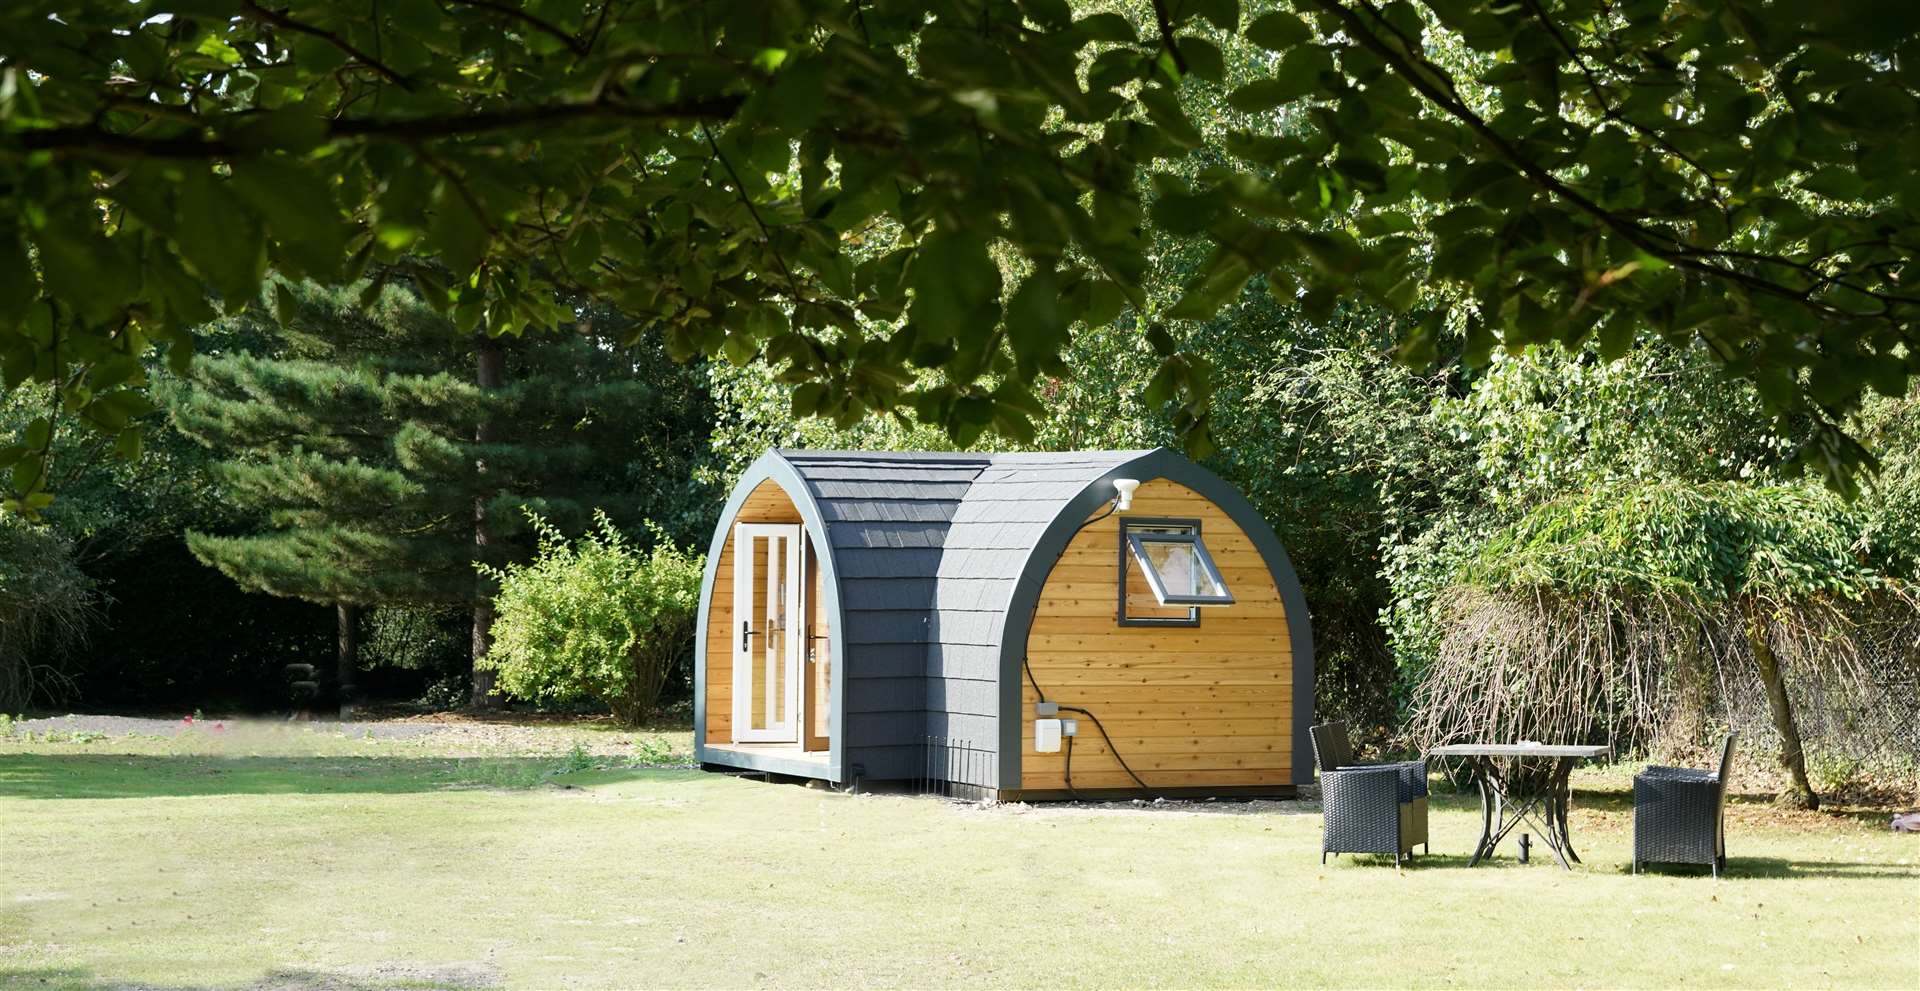 The retrospectively allowed glamping pod. Picture: Tina Green